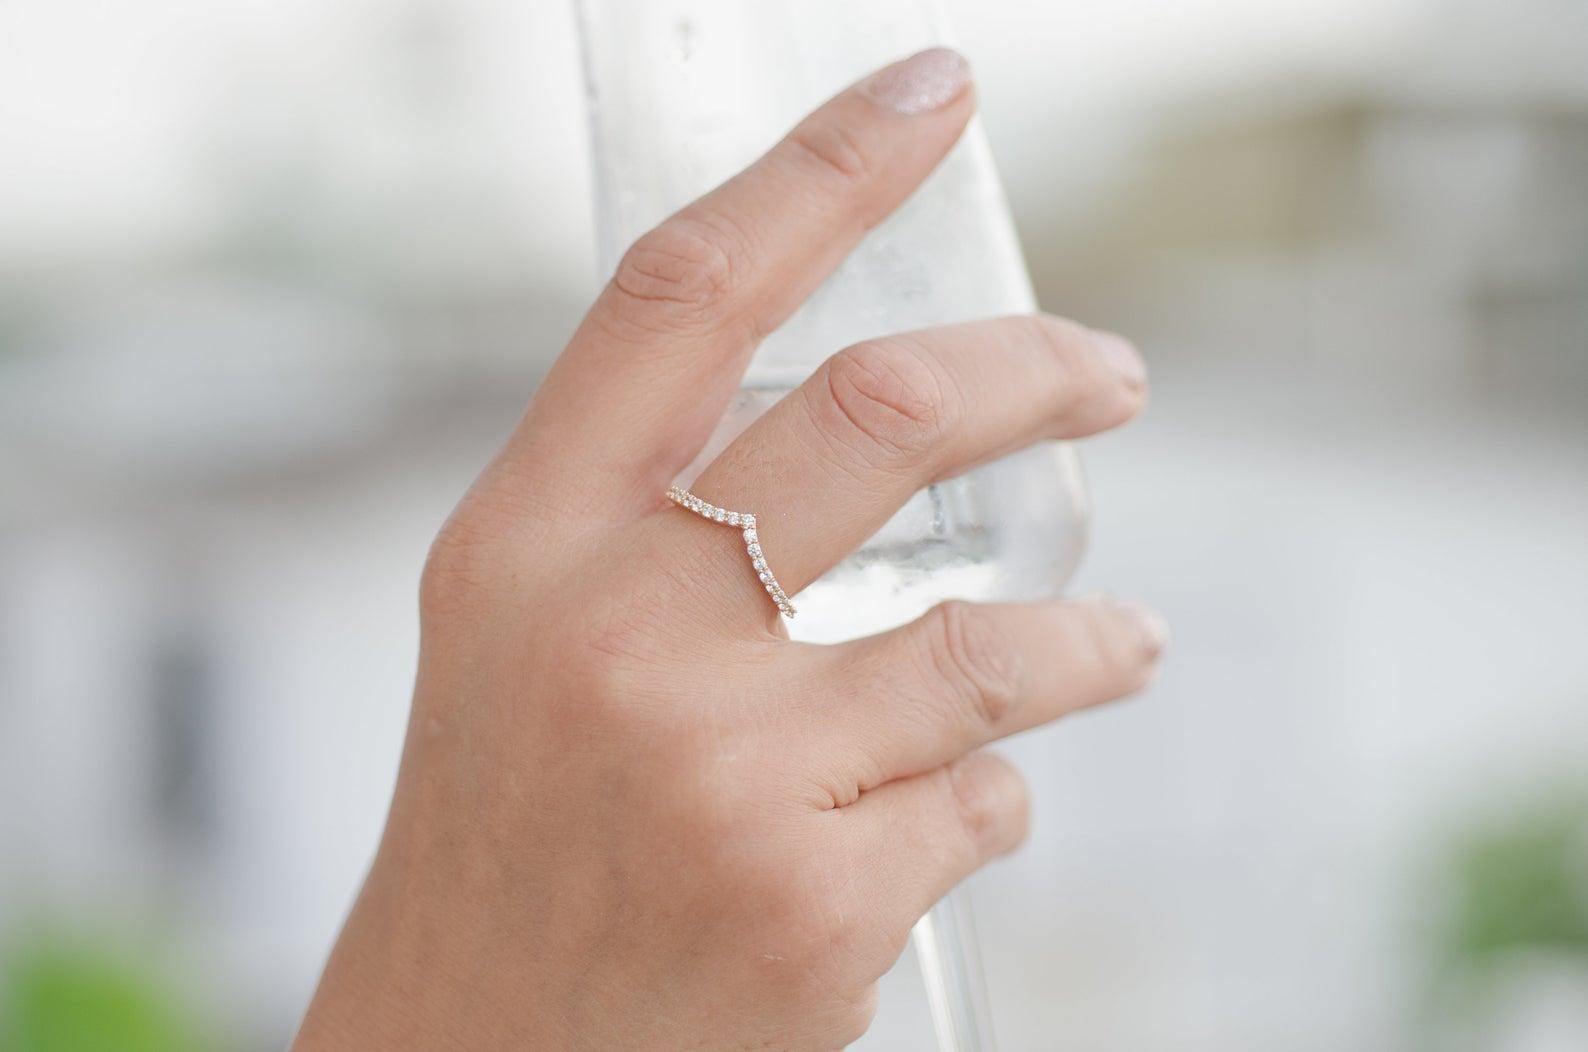 Beautiful chevron ring for Everyday Wear. Slimline of high-quality Diamonds, can wear alone or stack with Wedding Bands or Engagement Ring. Perfect for Anniversary and Holiday Gift.

Band Color/Metal type: 18K Yellow Gold, 18K White Gold, 18K Rose